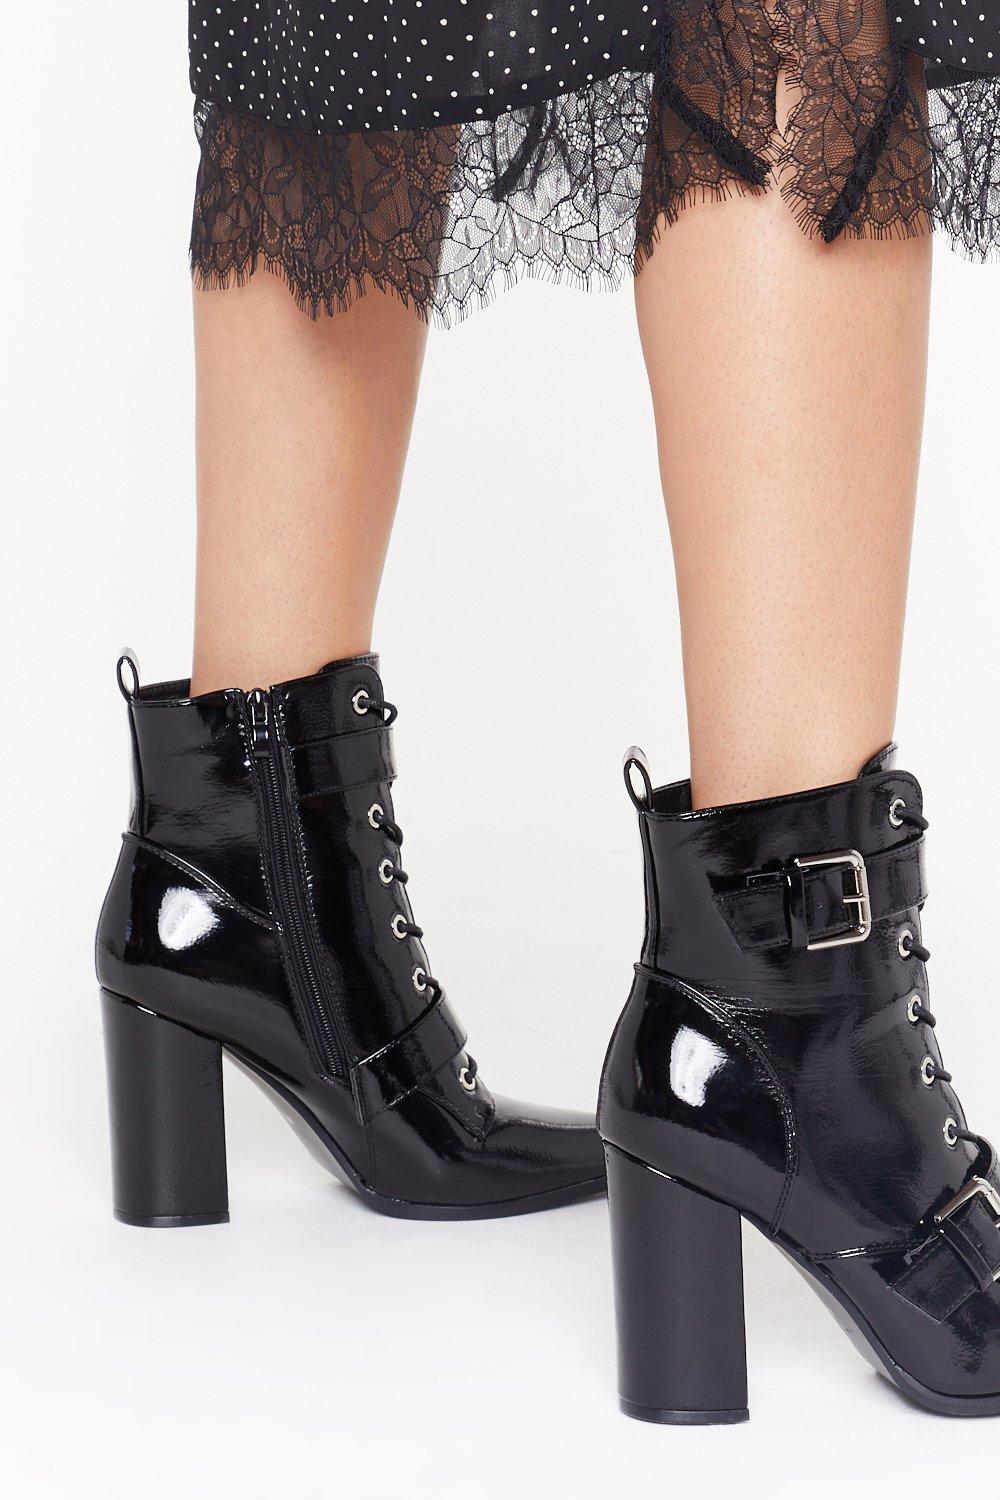 leather heeled boots